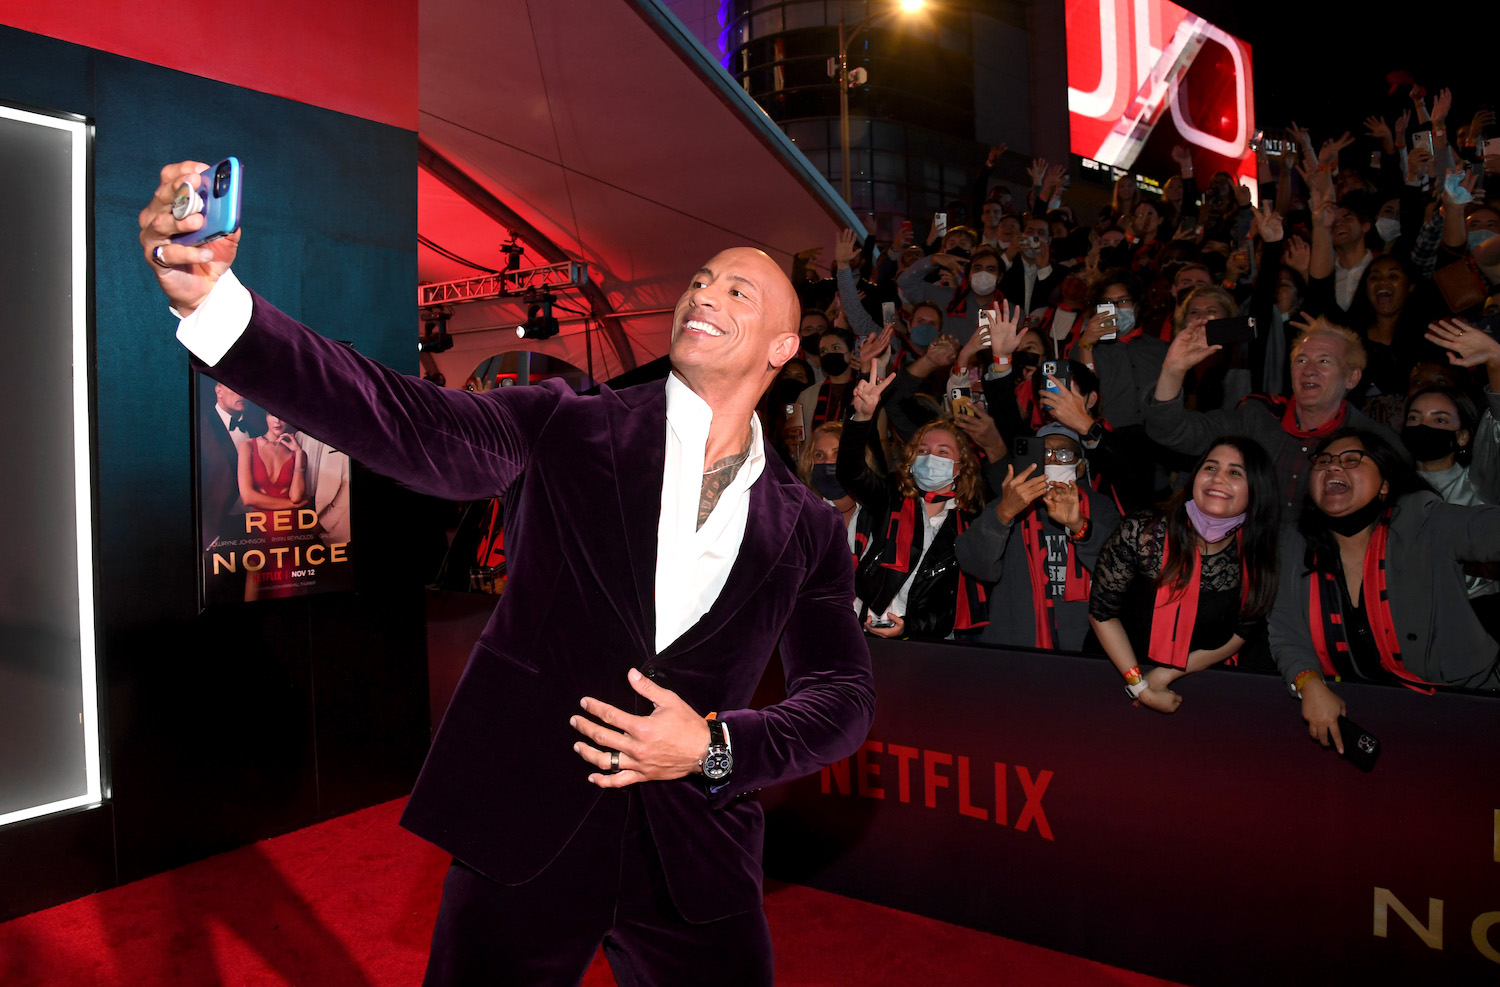 This is Dwayne Johnson, star of Red Notice, in which he drove a Porsche Taycan | | Kevin Mazur/Getty Images for Netflix